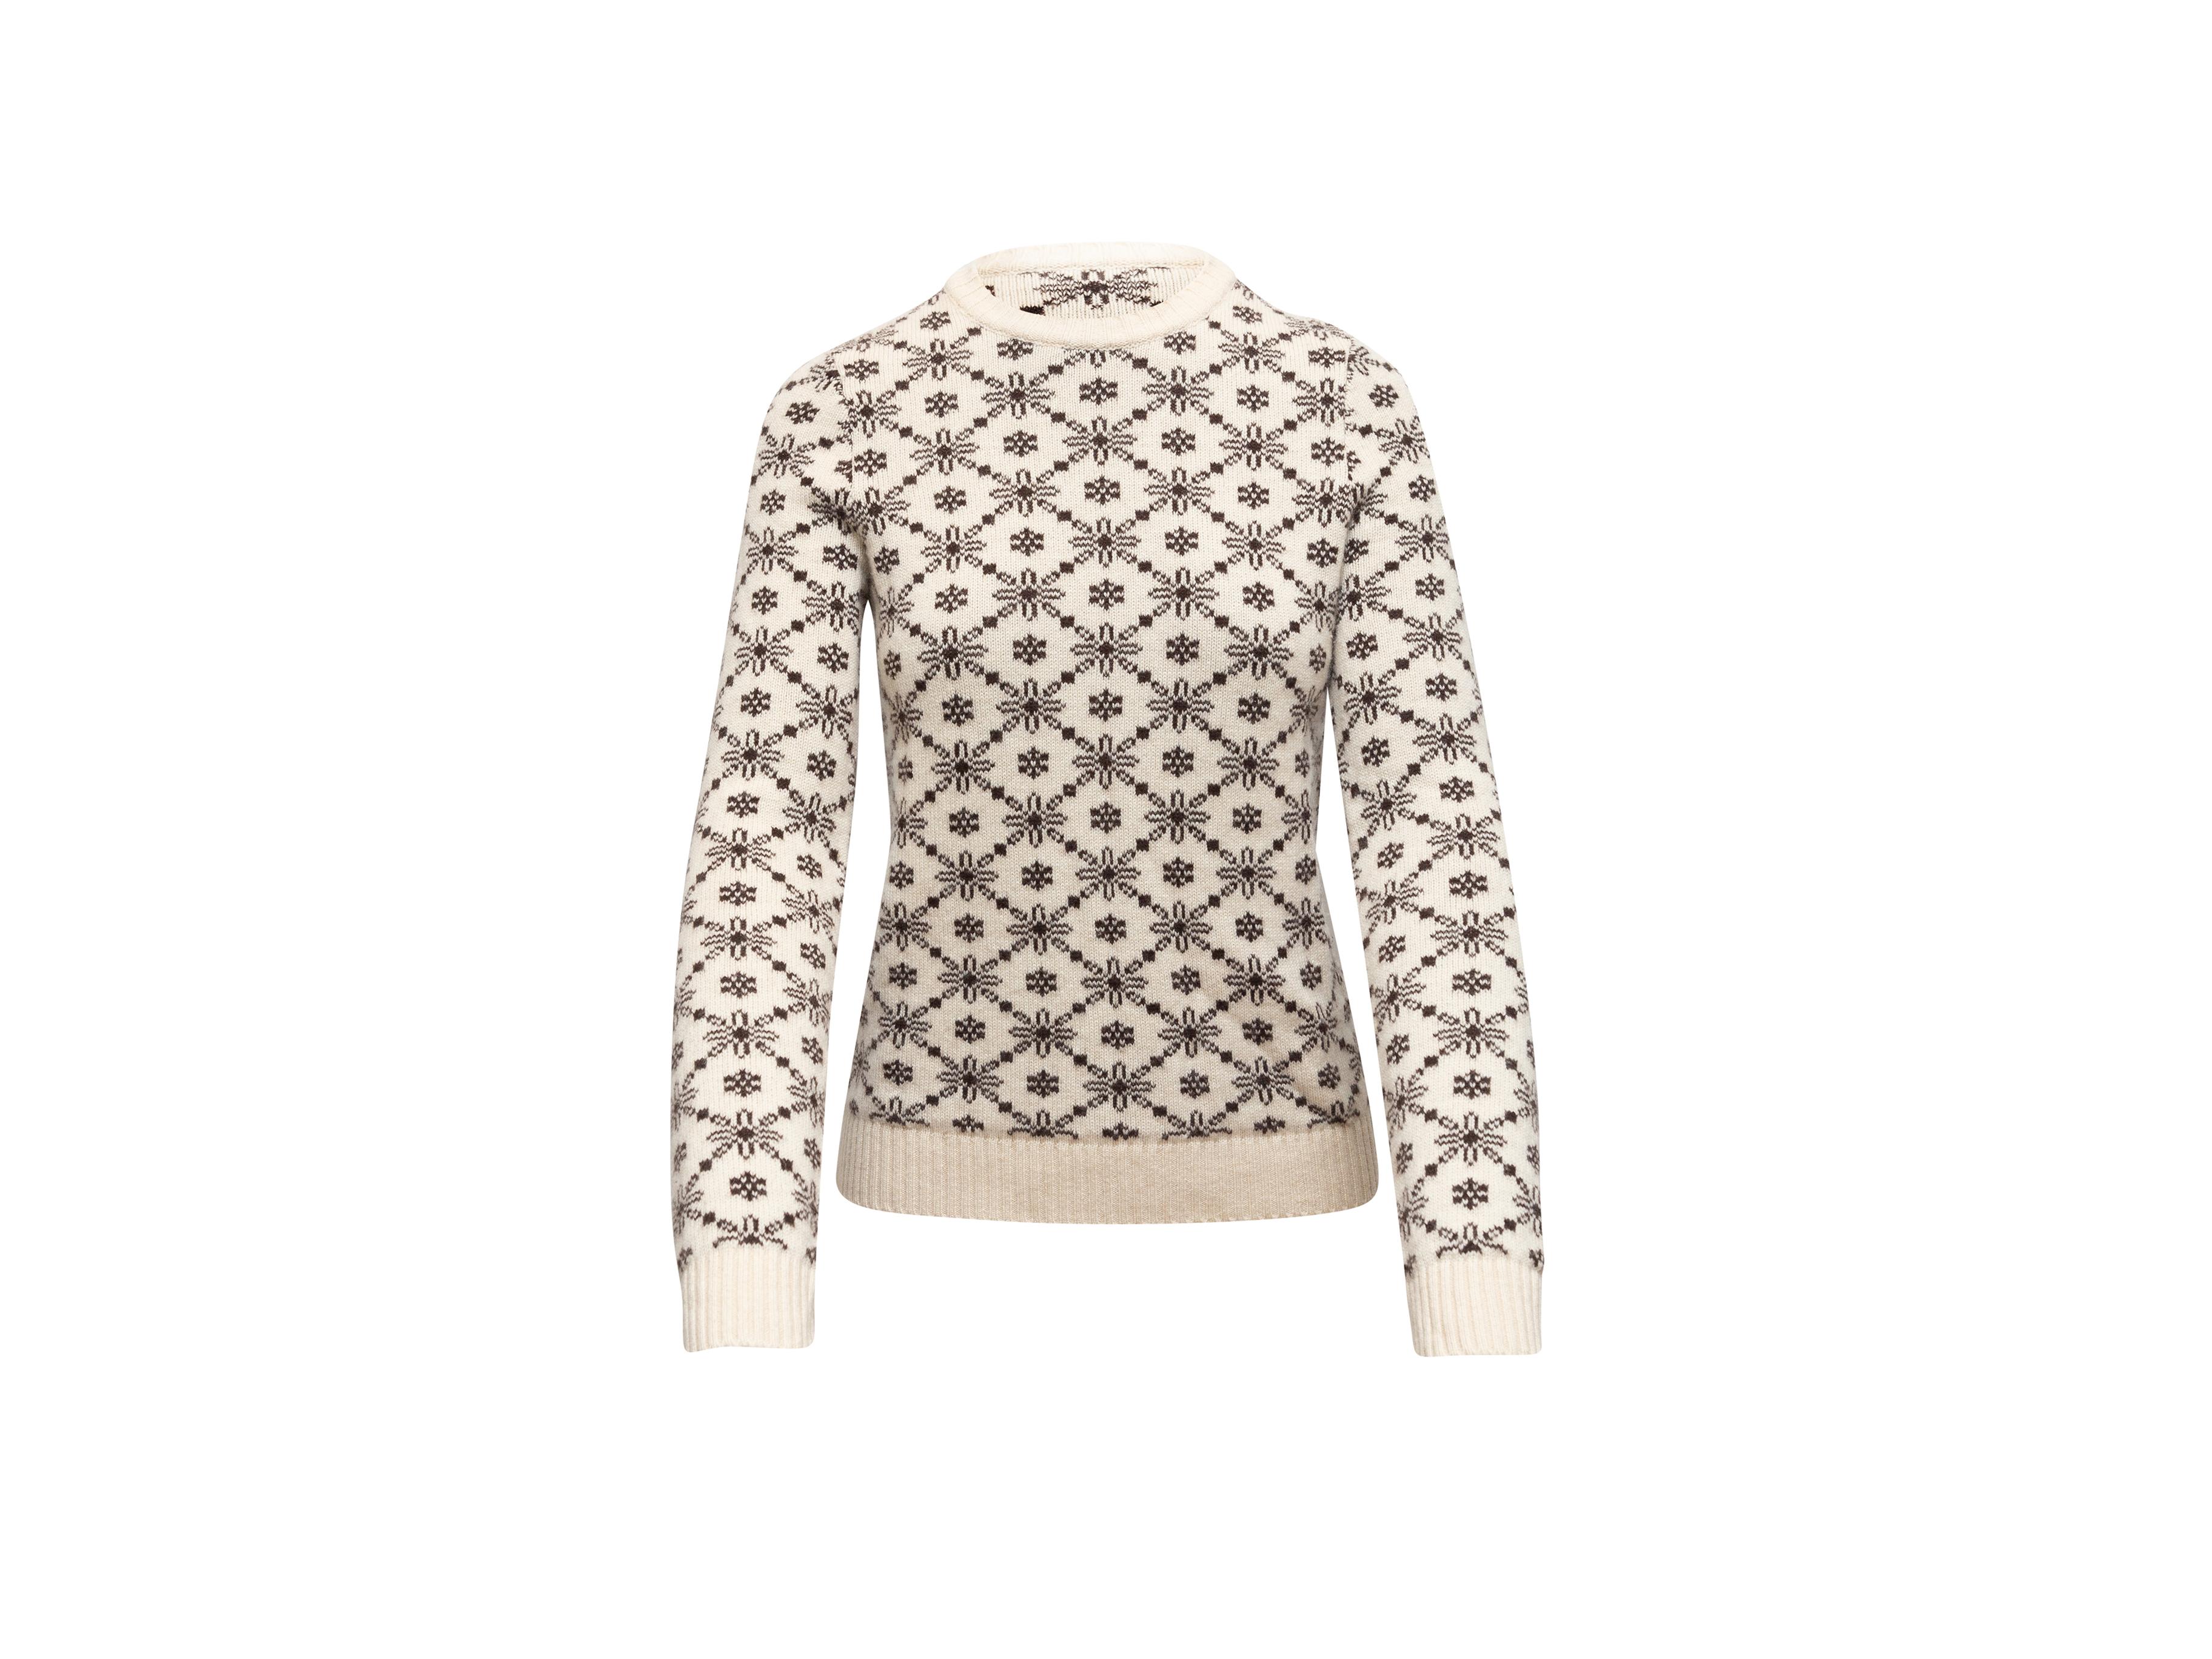 Product details: White and black cashmere snowflake patterned sweater by Chanel. Crew neck. Designer size 38. 32